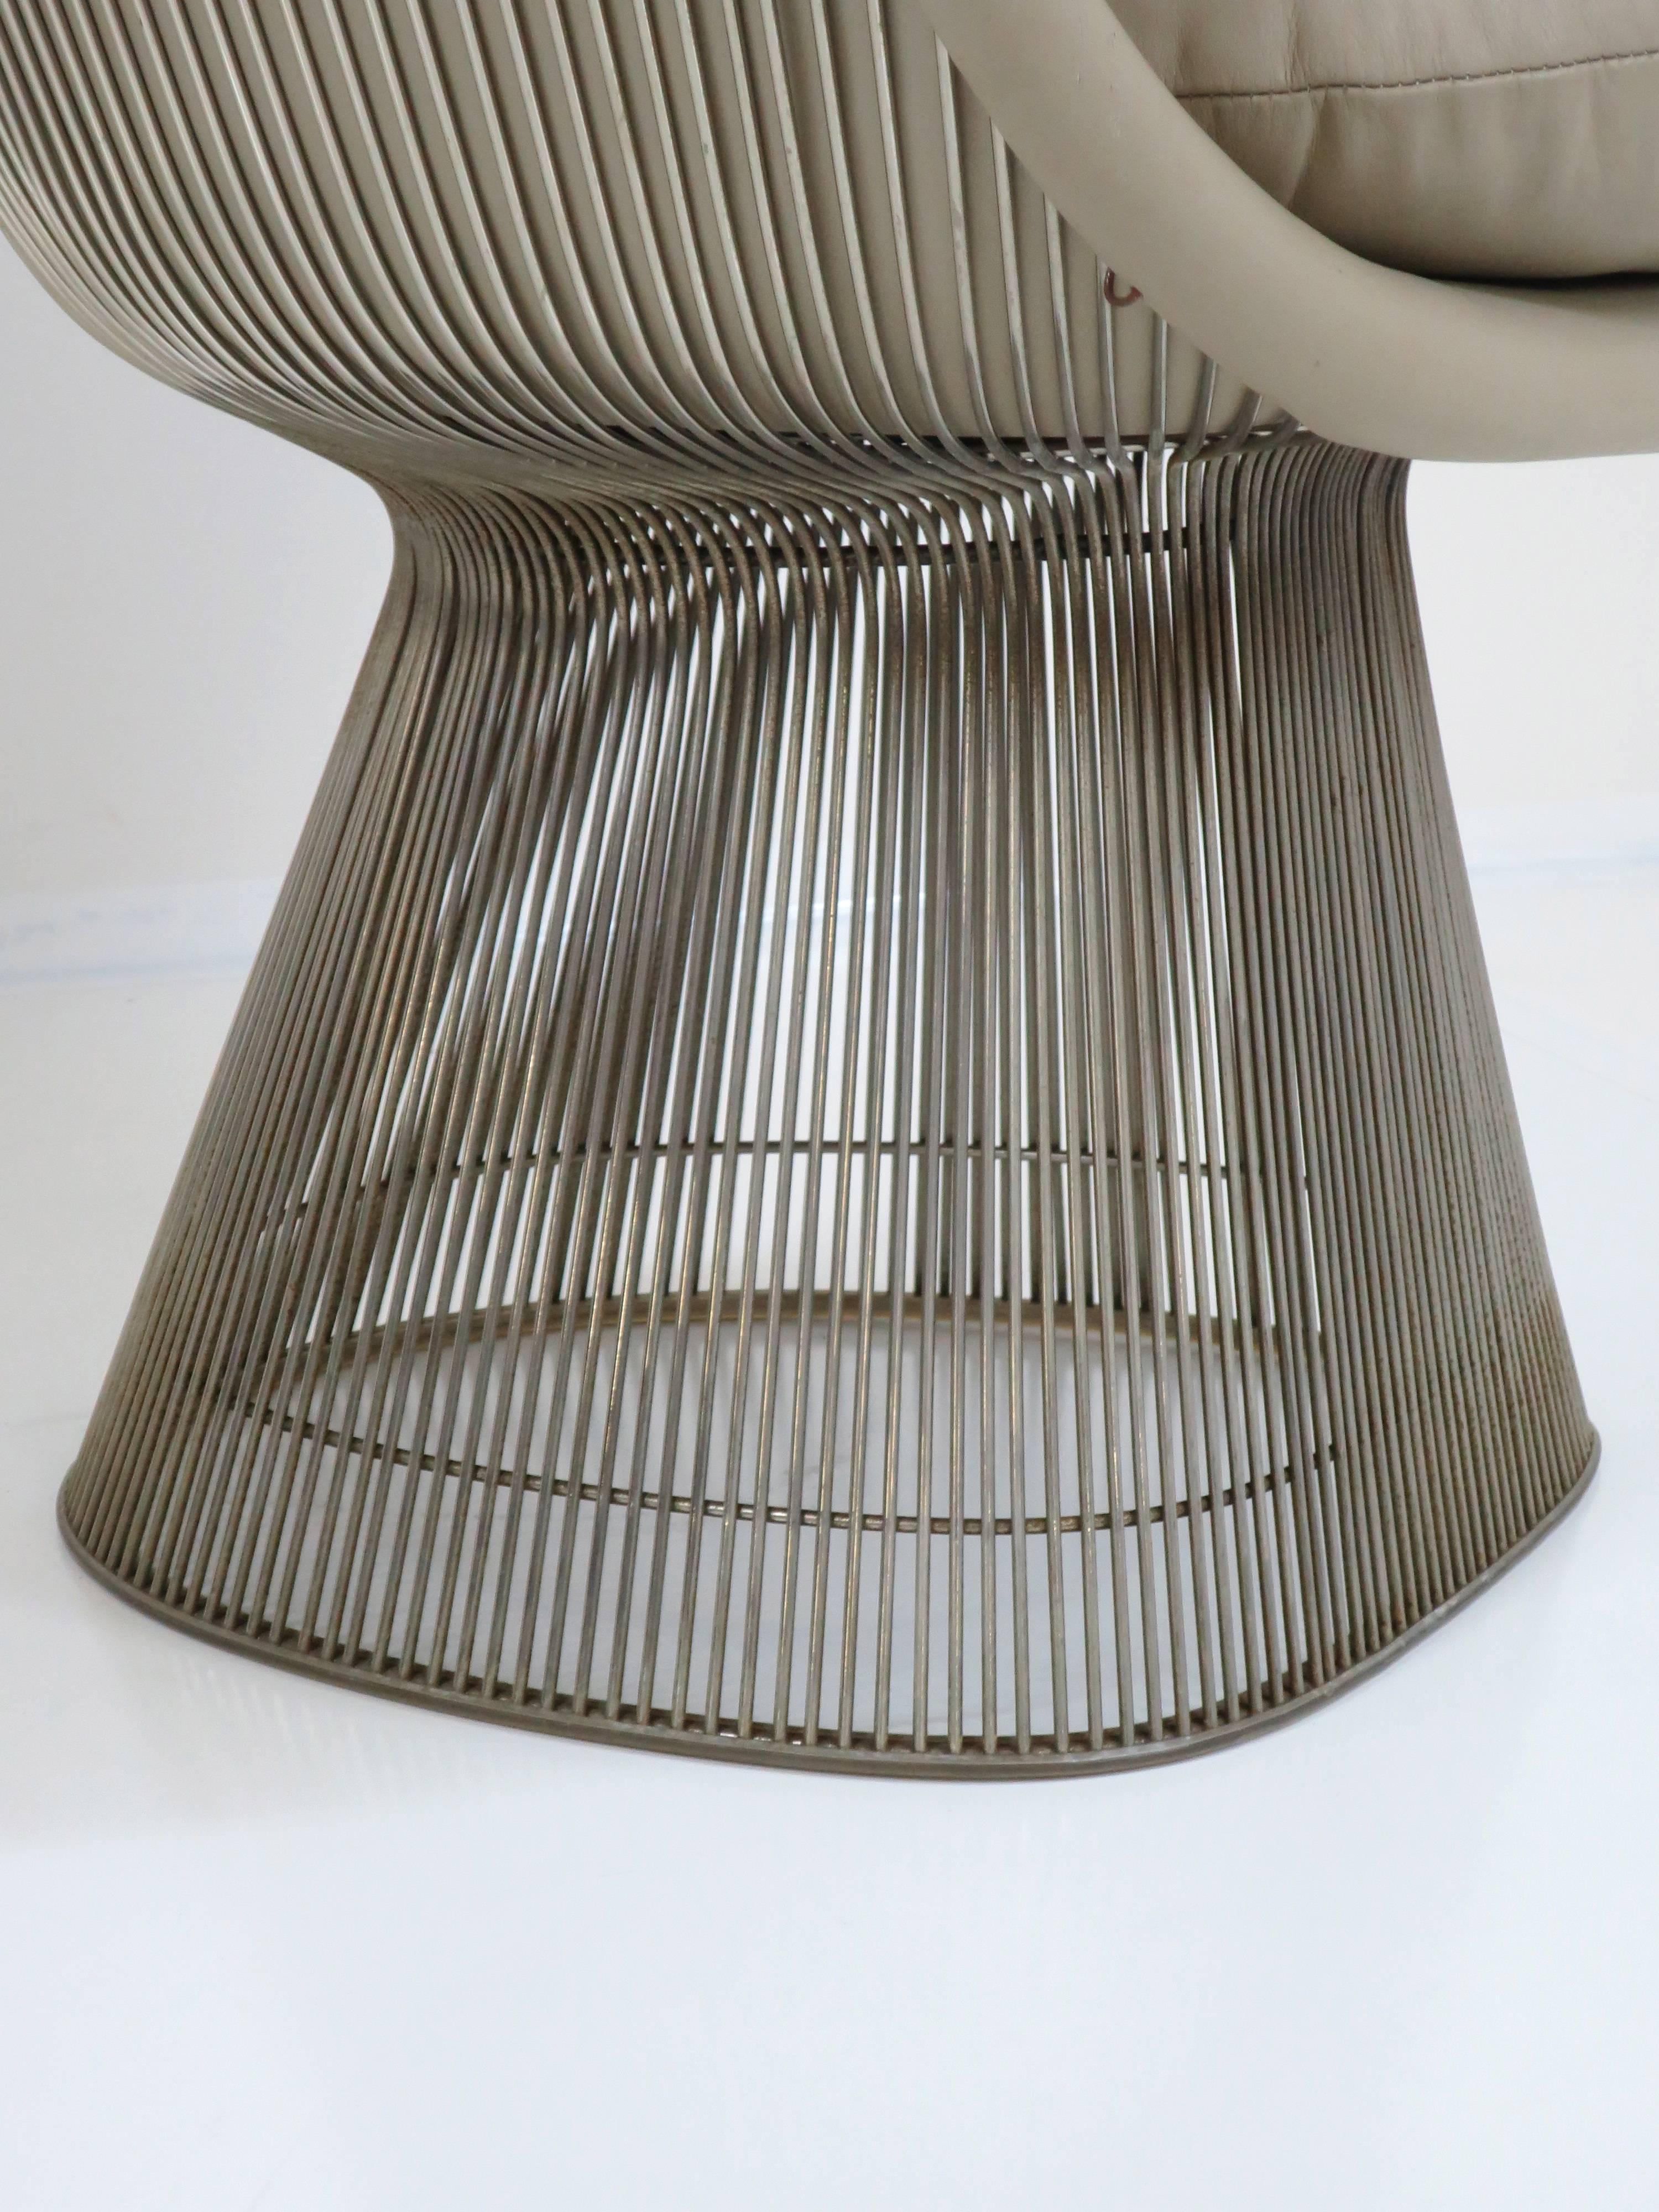 Warren Platner Lounge Chair for Knoll Inc In Good Condition In San Diego, CA